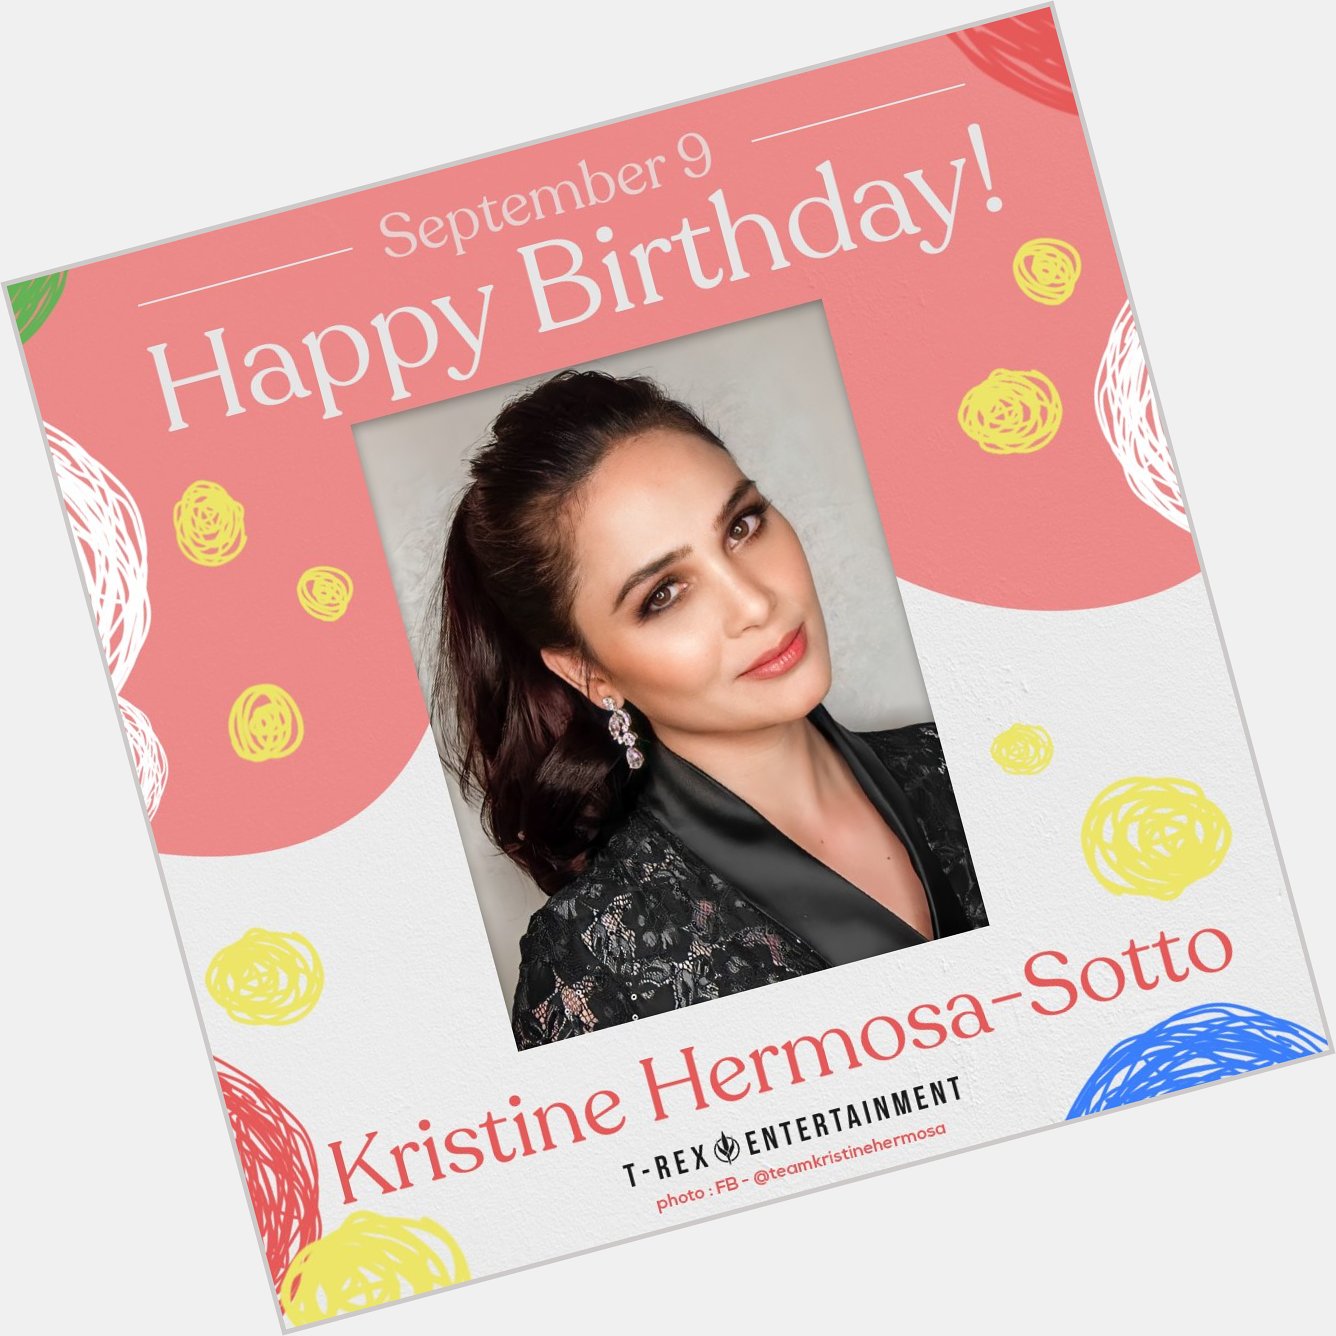 Happy 37th birthday, Kristine Hermosa-Sotto!

We wish you all the best for you and your lovely family! 